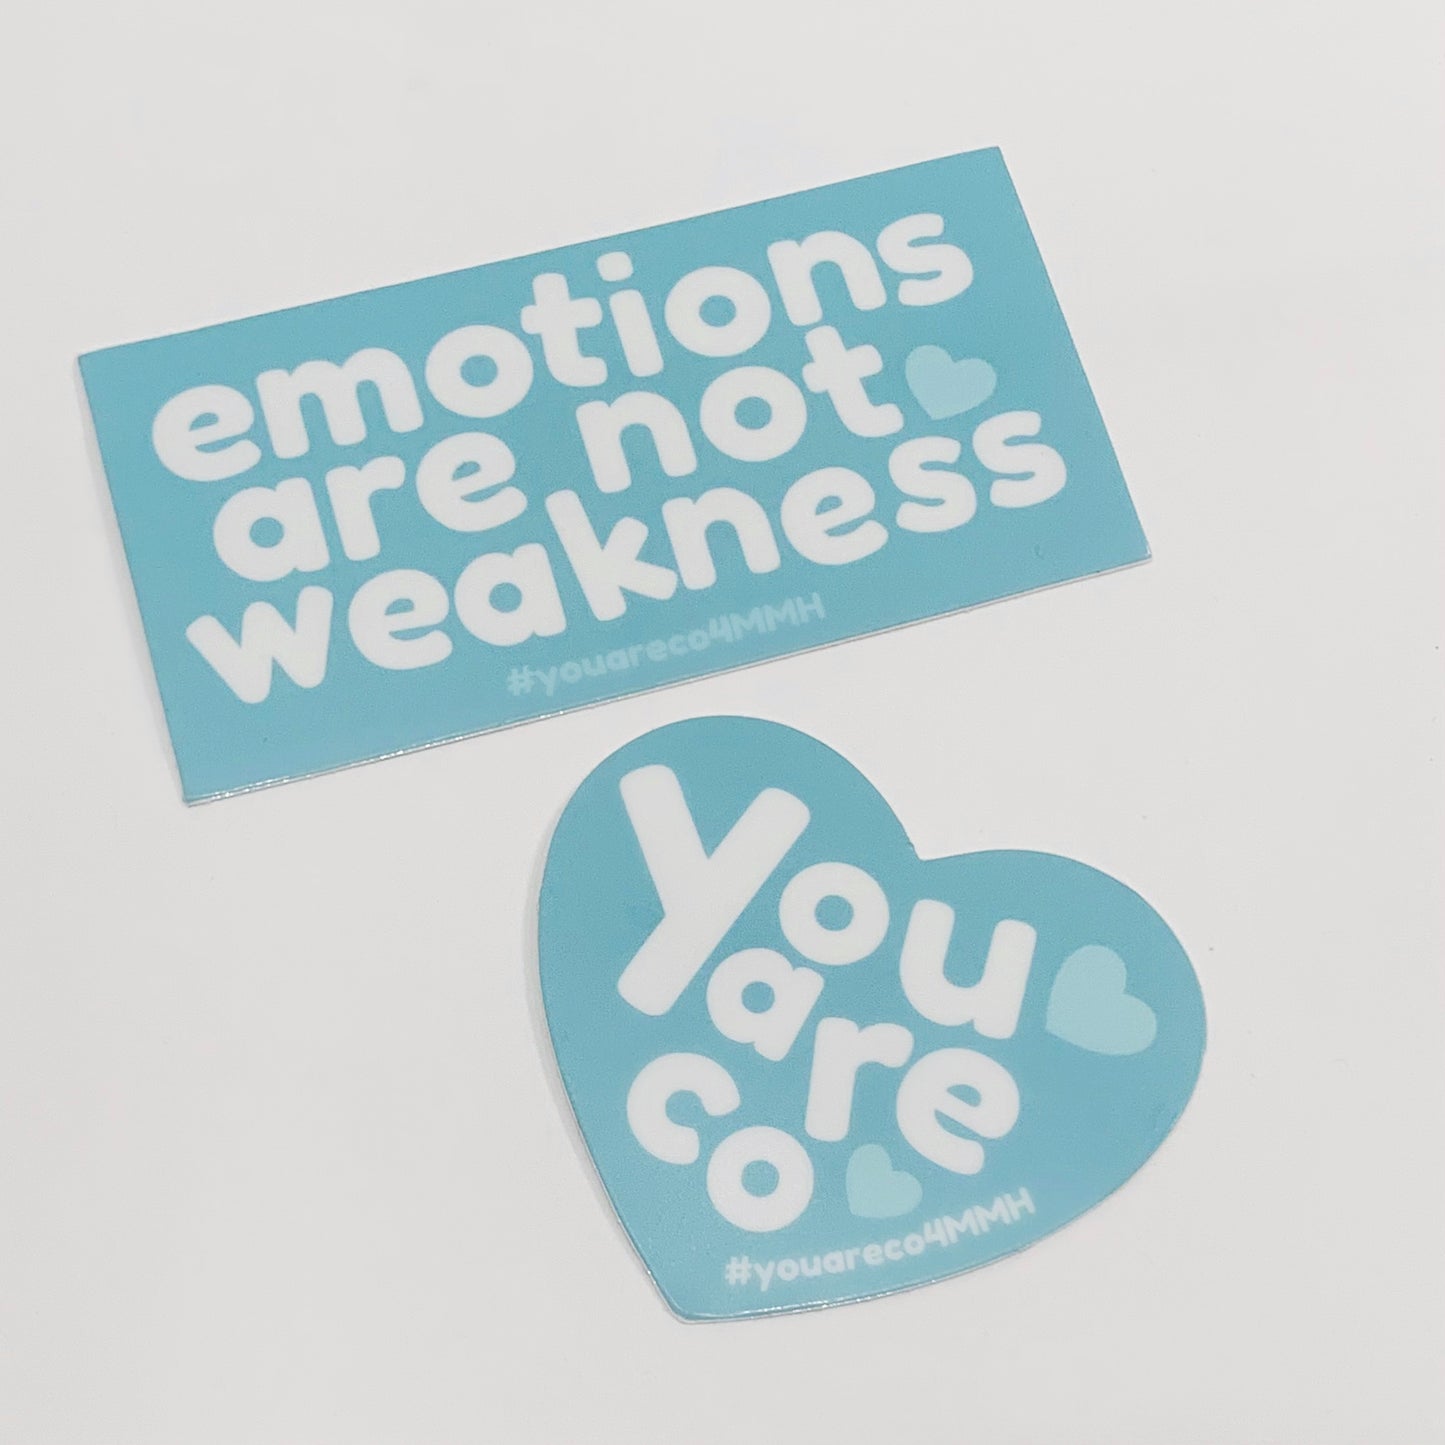 emotions are not weakness sticker